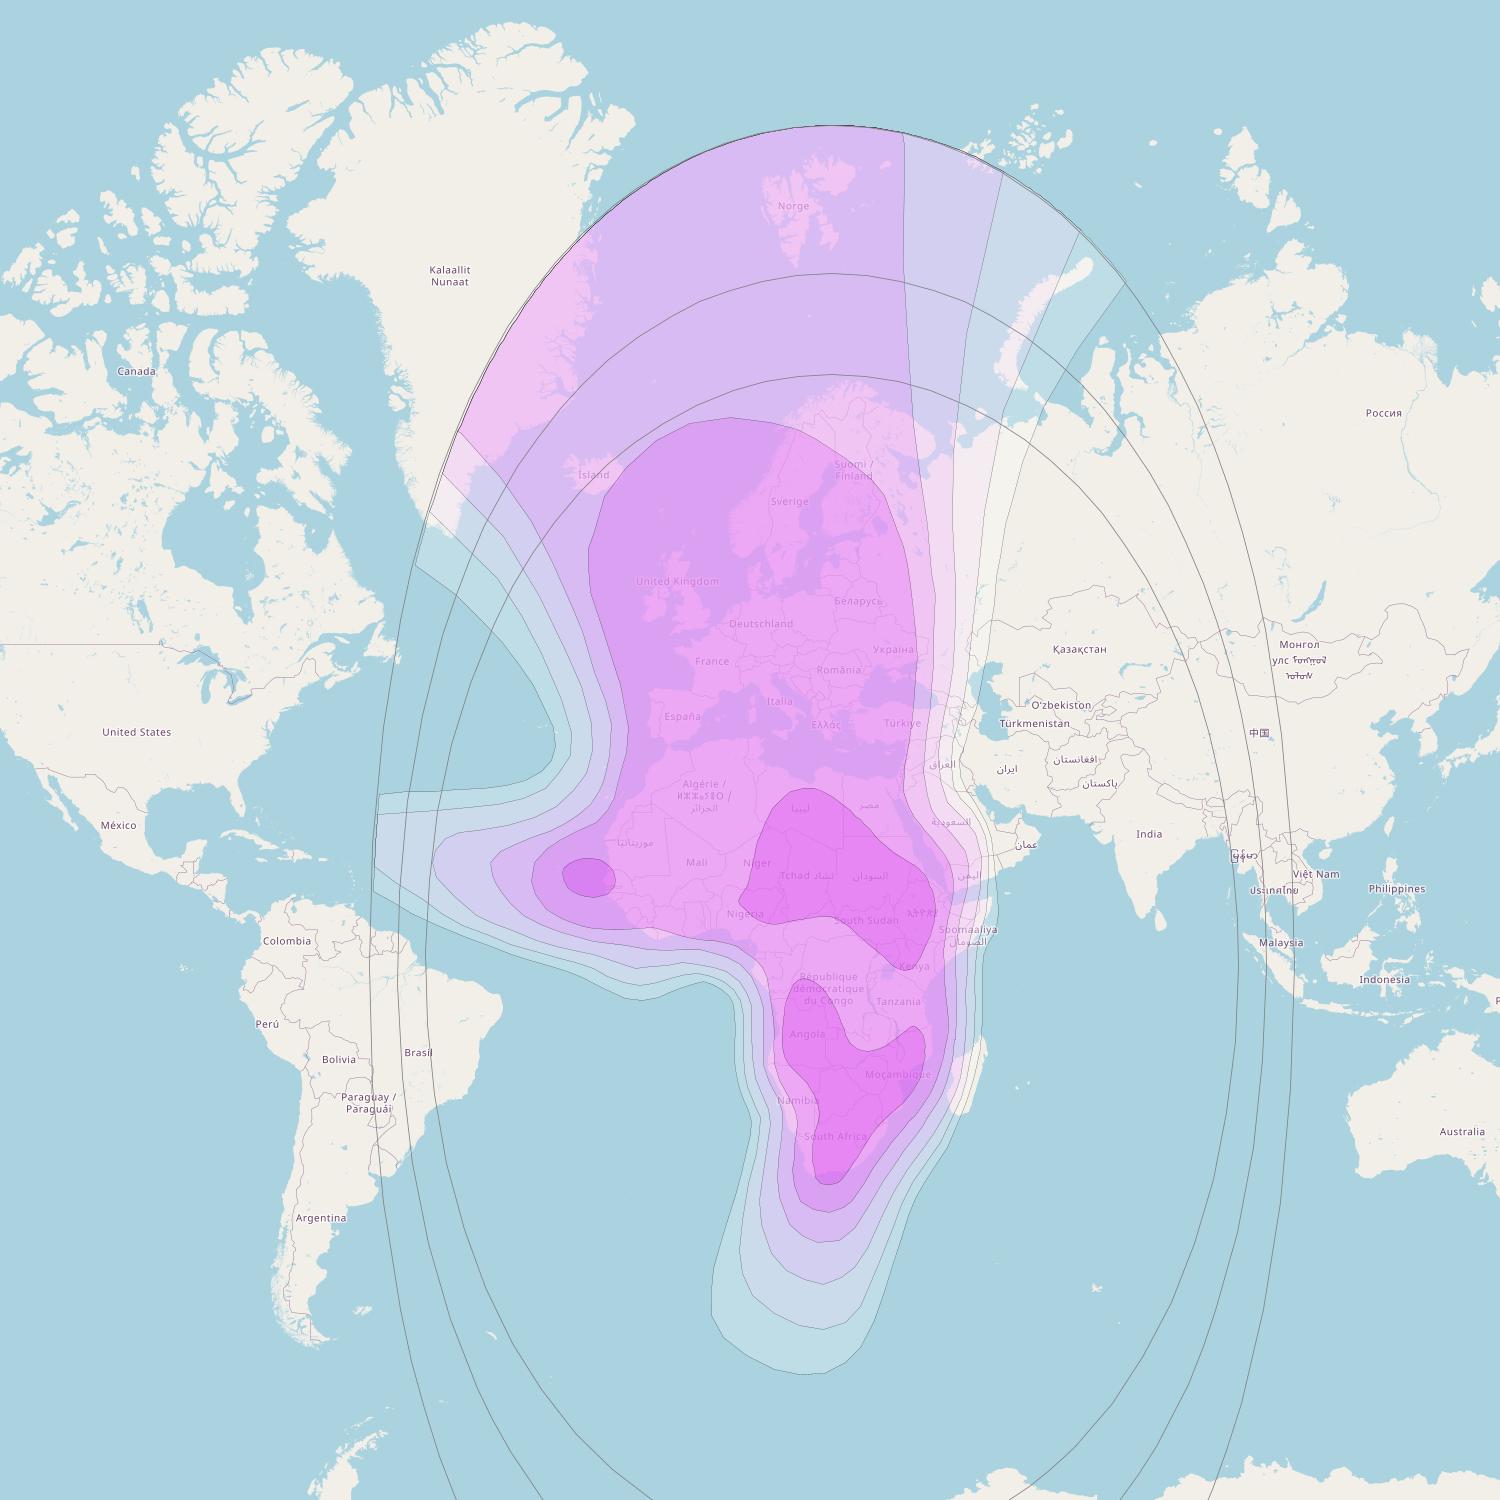 Angosat 2 at 23° E downlink C-band Europe and Africa beam coverage map